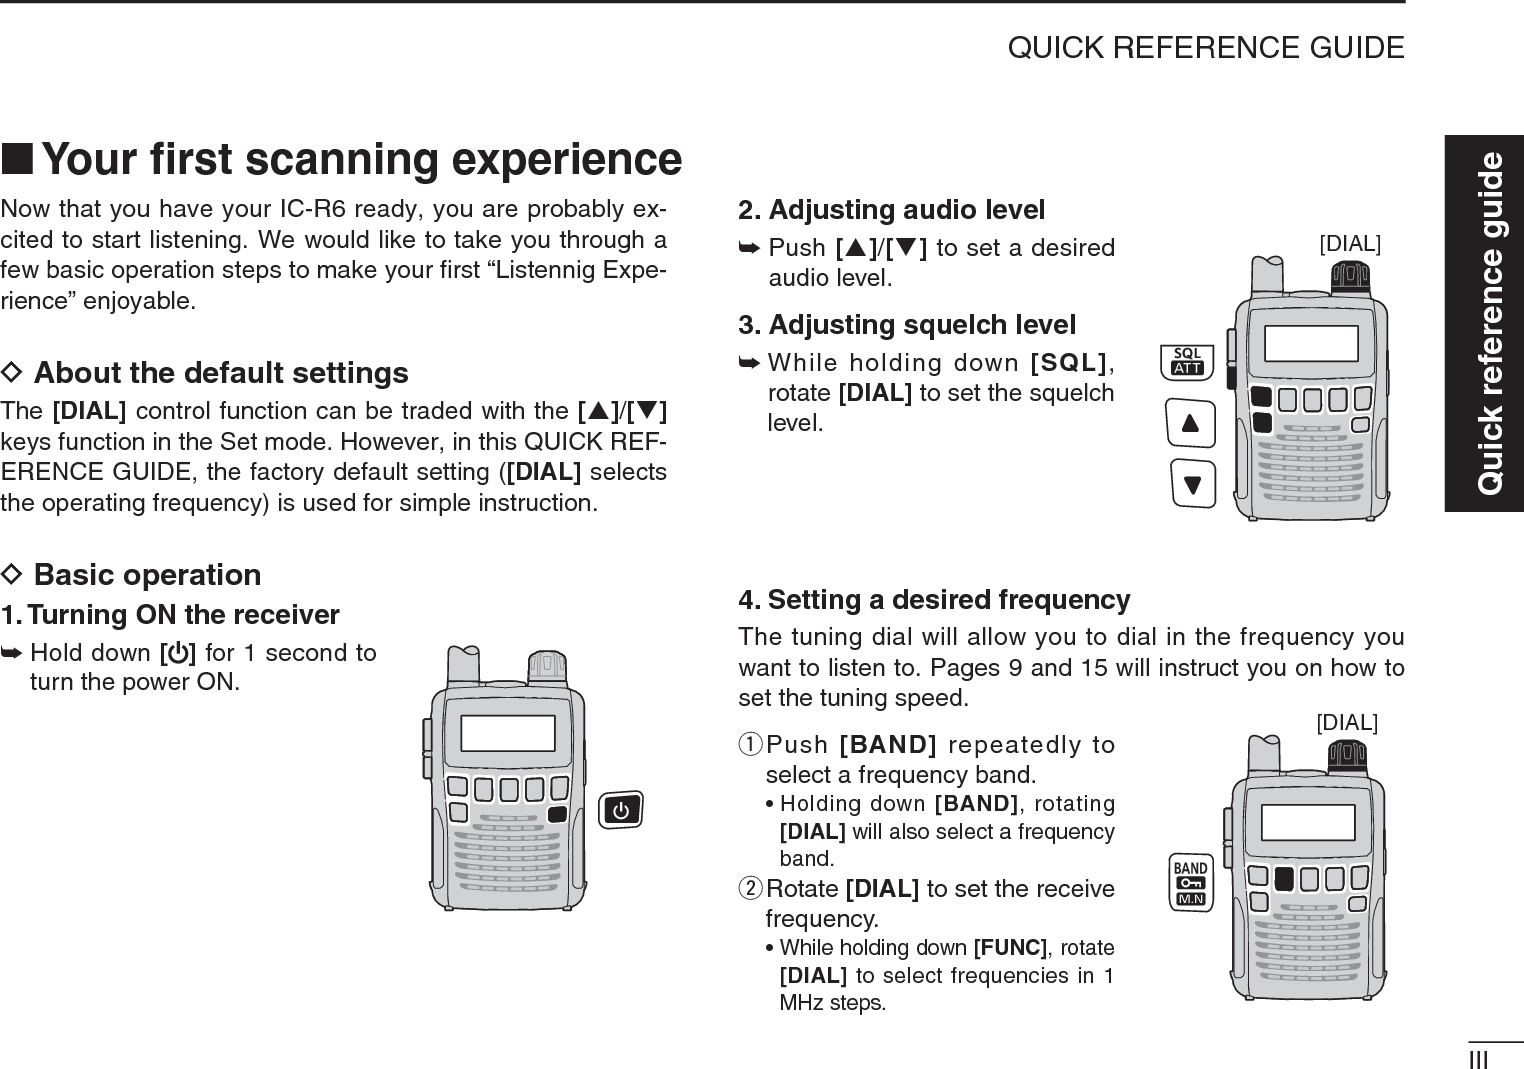 IIIQUICK REFERENCE GUIDEQuick reference guideNow that you have your IC-R6 ready, you are probably ex-cited to start listening. We would like to take you through a few basic operation steps to make your ﬁrst “Listennig Expe-rience” enjoyable. DAbout the default settingsThe [DIAL] control function can be traded with the [S]/[T]keys function in the Set mode. However, in this QUICK REF-ERENCE GUIDE, the factory default setting ([DIAL] selects the operating frequency) is used for simple instruction.DBasic operation1. Turning ON the receiver±Hold down [ ] for 1 second to turn the power ON.2. Adjusting audio level±Push [S]/[T] to set a desired audio level.3. Adjusting squelch level±While holding down [SQL],rotate [DIAL] to set the squelch level.4. Setting a desired frequencyThe tuning dial will allow you to dial in the frequency you want to listen to. Pages 9 and 15 will instruct you on how to set the tuning speed.q  Push [BAND] repeatedly to select a frequency band.• Holding down [BAND], rotating [DIAL] will also select a frequency band.w  Rotate [DIAL] to set the receive frequency.•While holding down [FUNC], rotate [DIAL] to select frequencies in 1 MHz steps.N Your ﬁrst scanning experience[DIAL][DIAL]